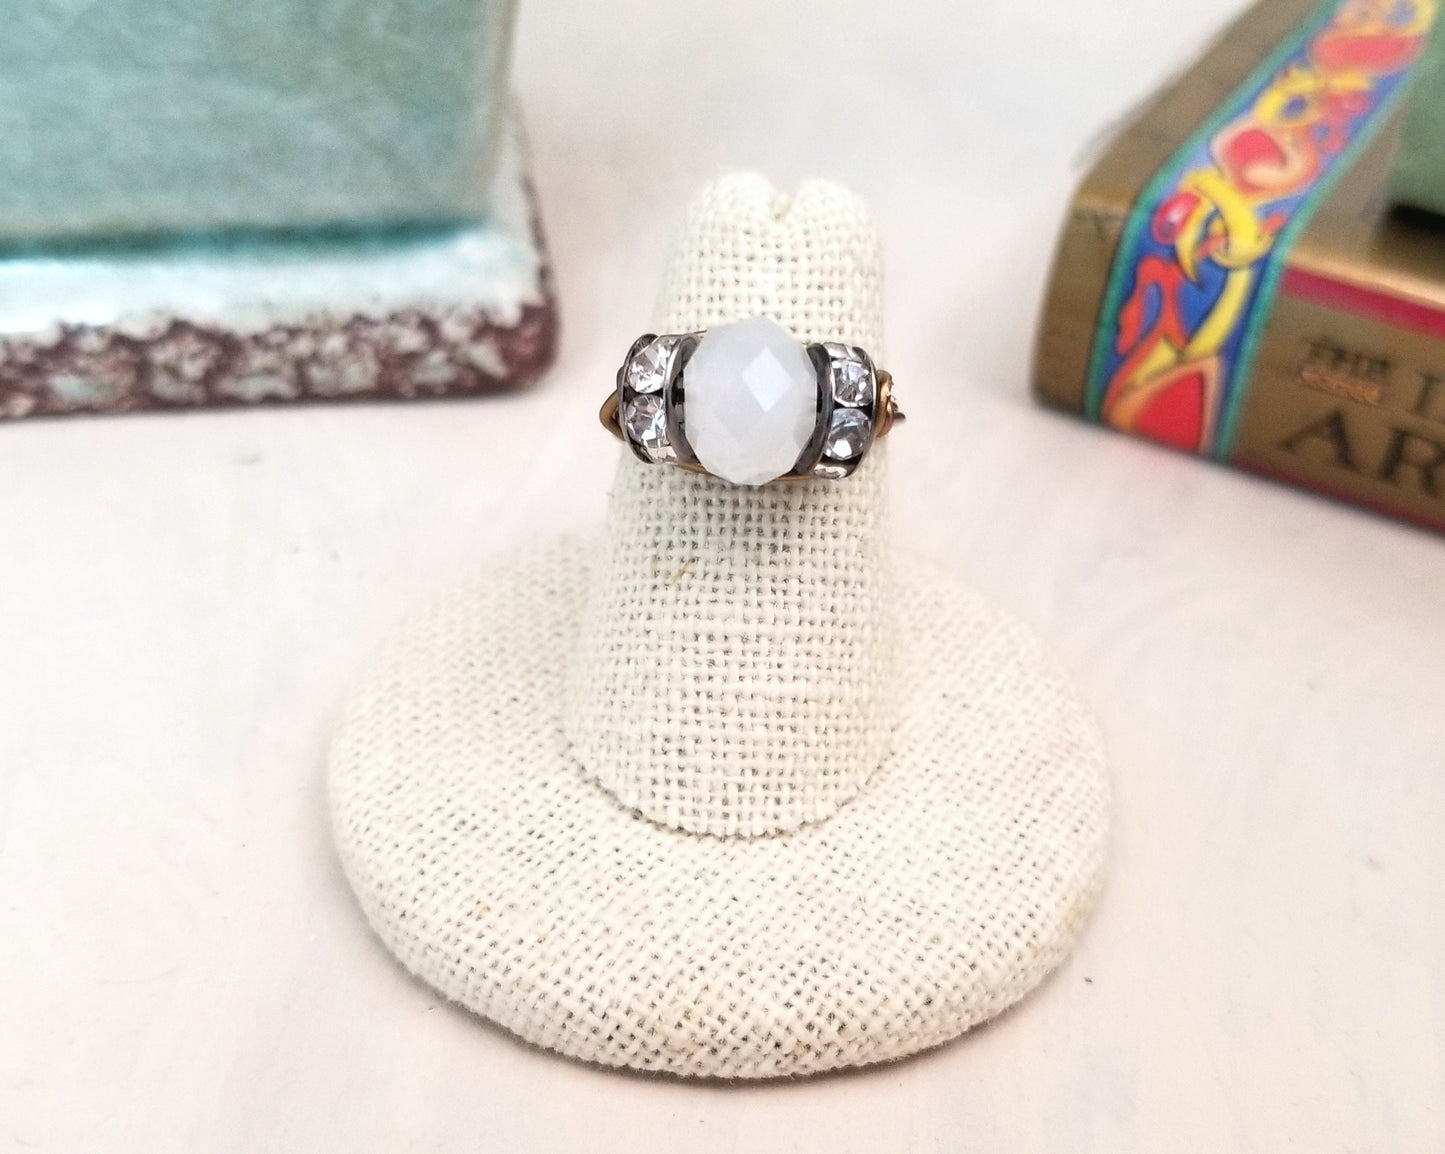 Wire Ring in Moonstone White with Rhinestones, Fairy Tale, Renaissance, Medieval, Choice of Colors and Metals